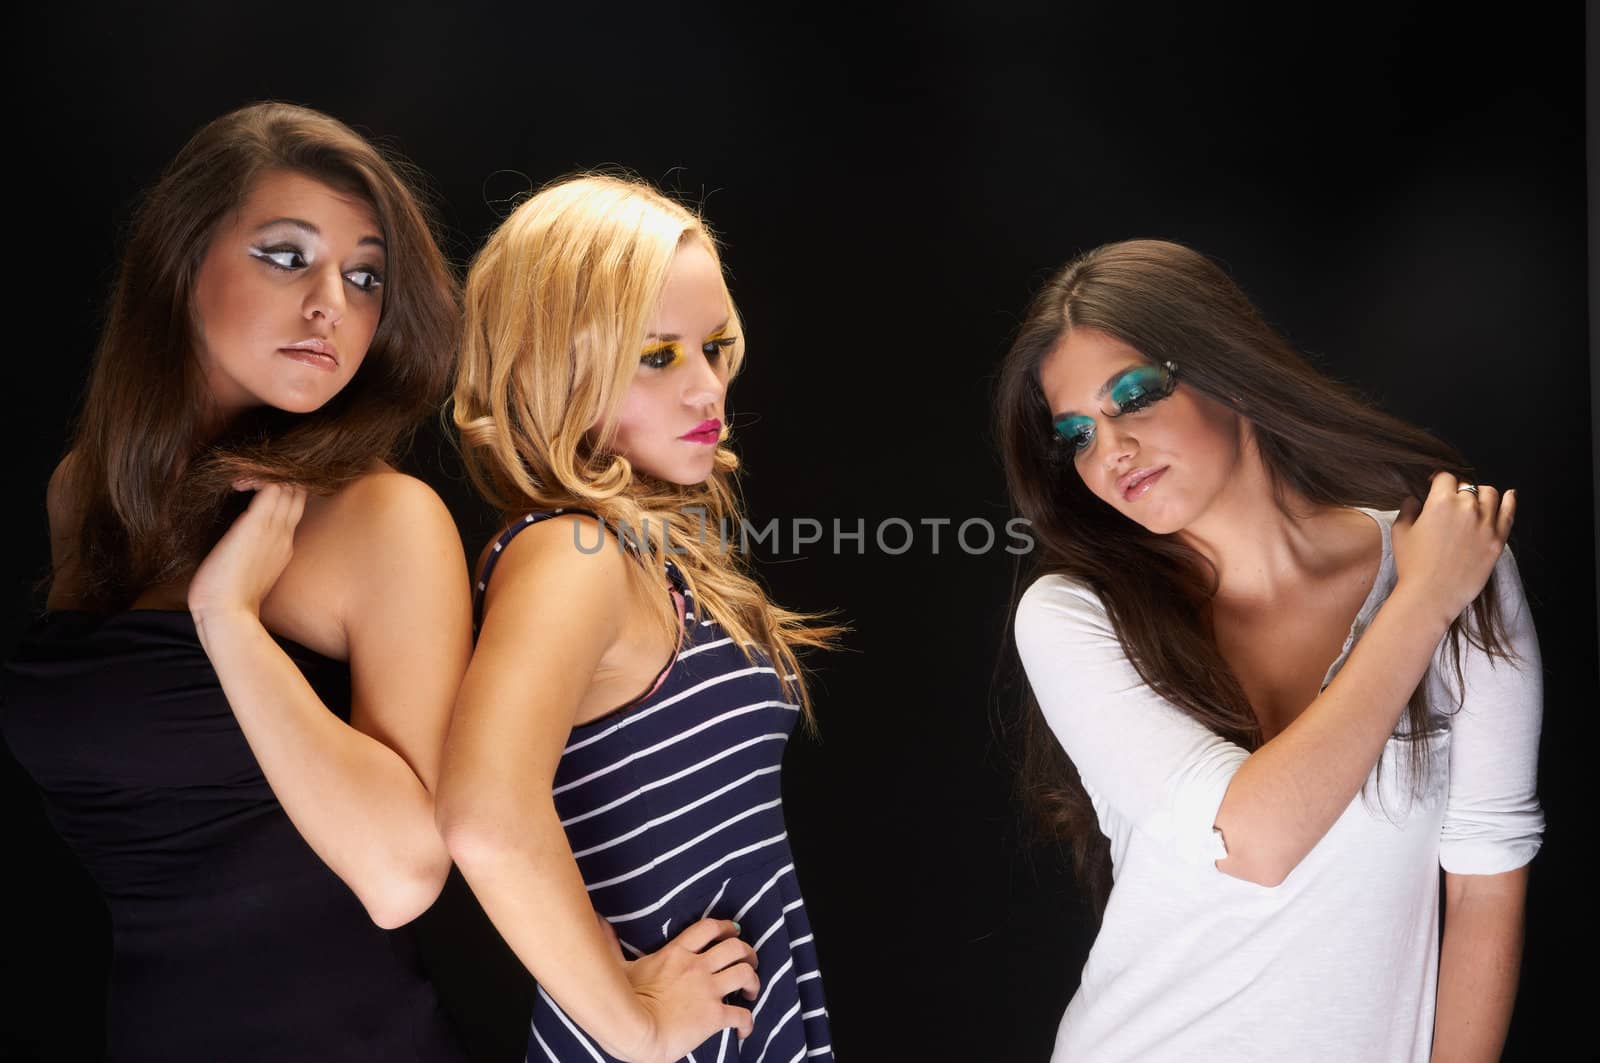 A group of young models against dark background a the studio